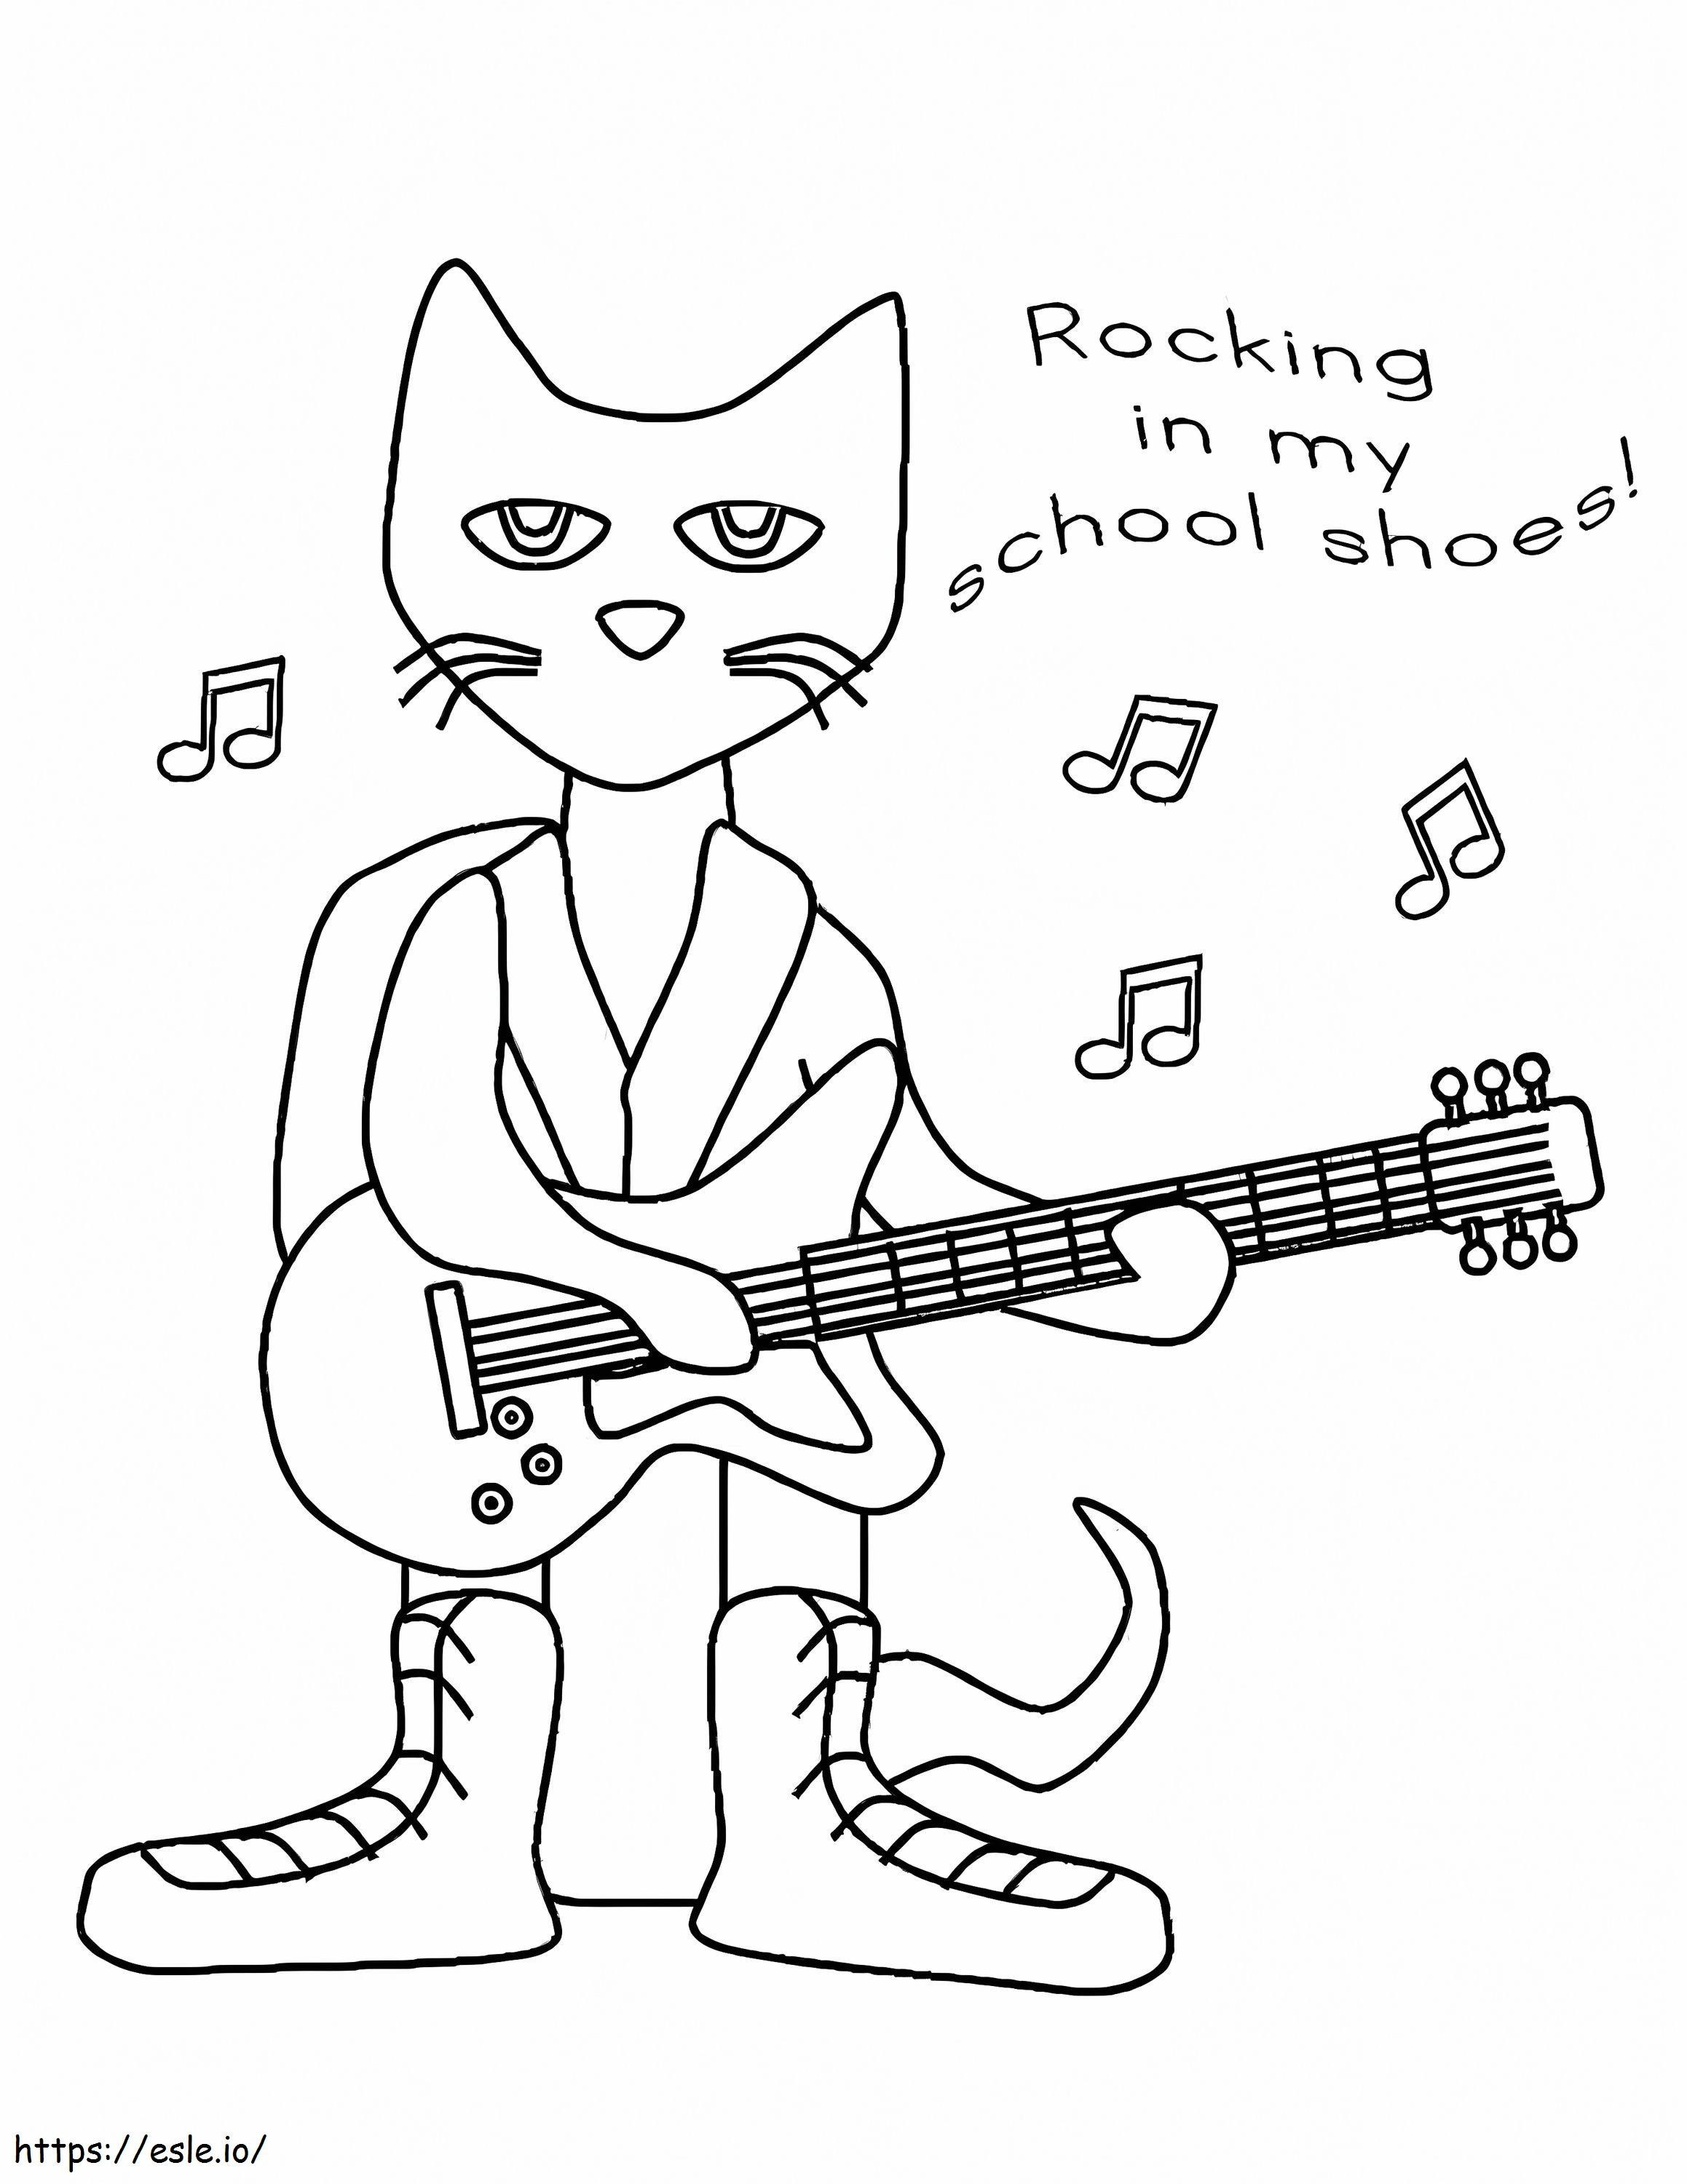 Pete The Cat Playing Guitar And Singing coloring page